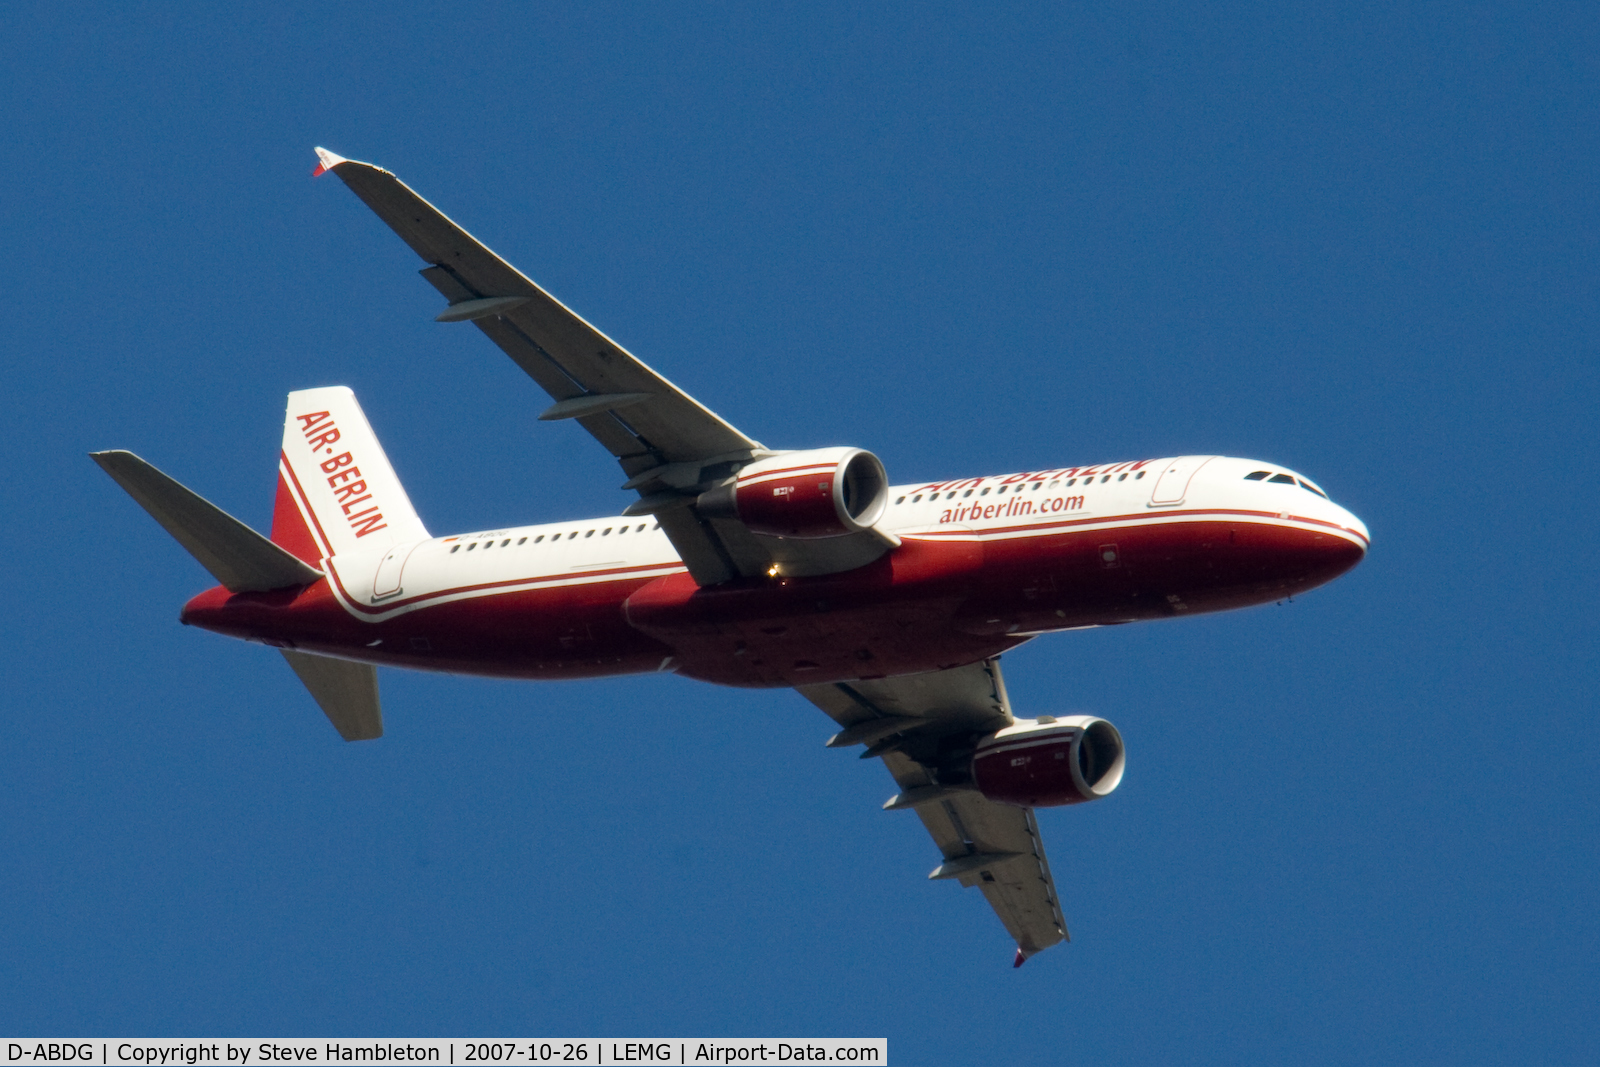 D-ABDG, 1999 Airbus A320-214 C/N 2835, 11 miles out from Malaga, Pablo Picasso Airport